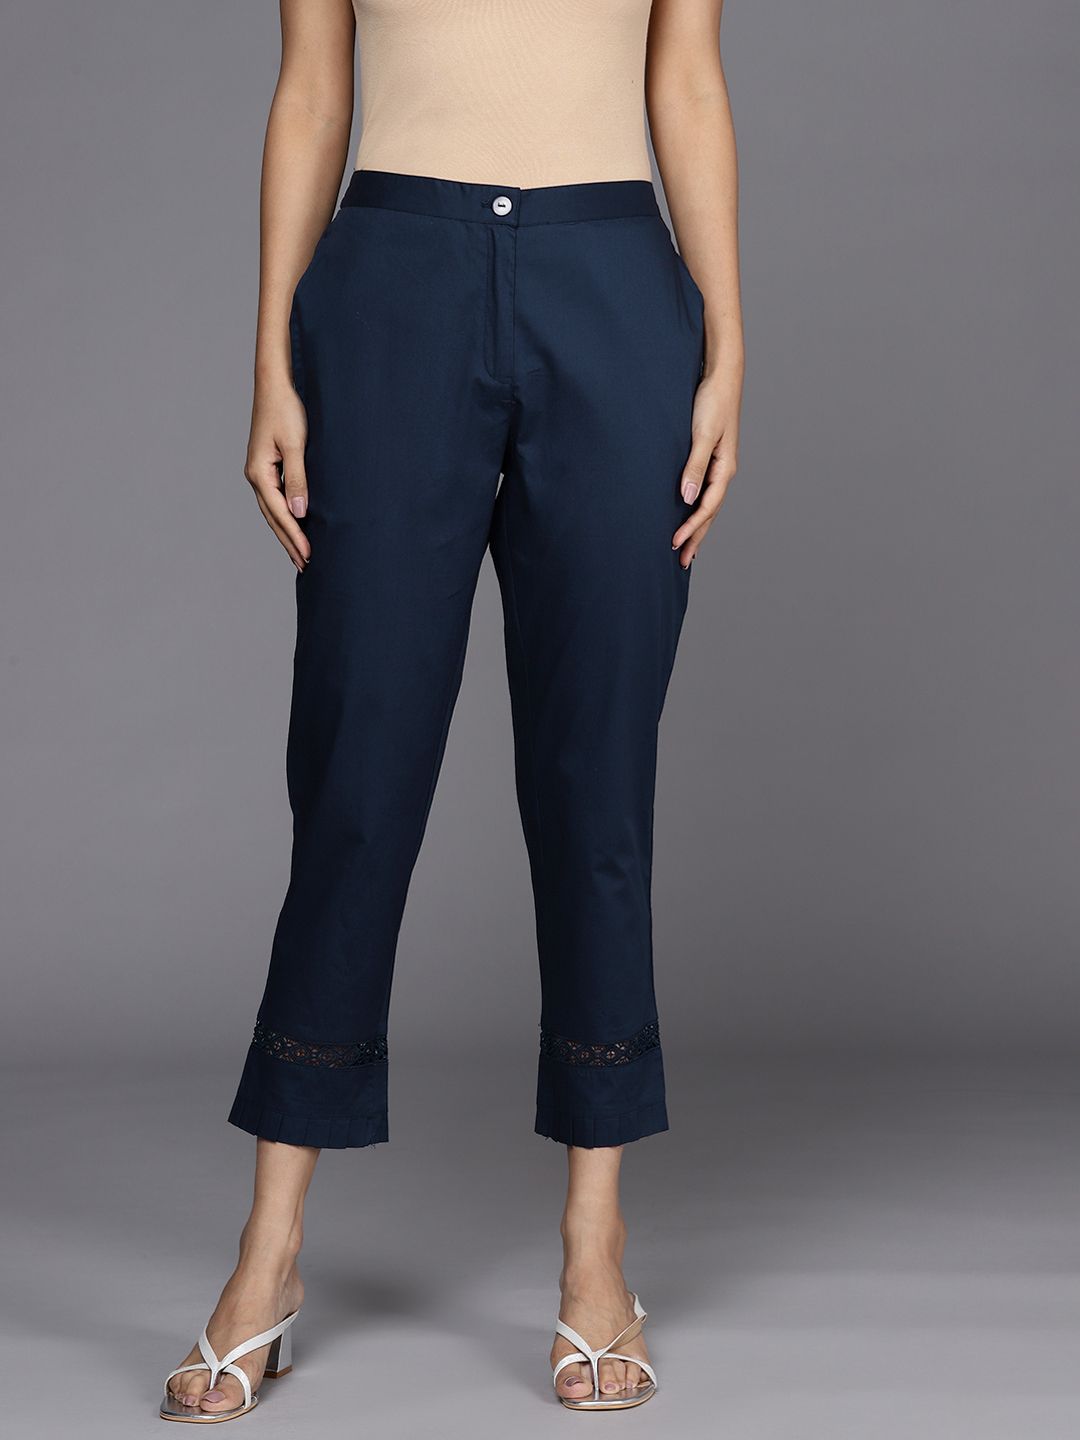 Libas Women Navy Blue Straight Fit Pure Cotton Trousers Price in India